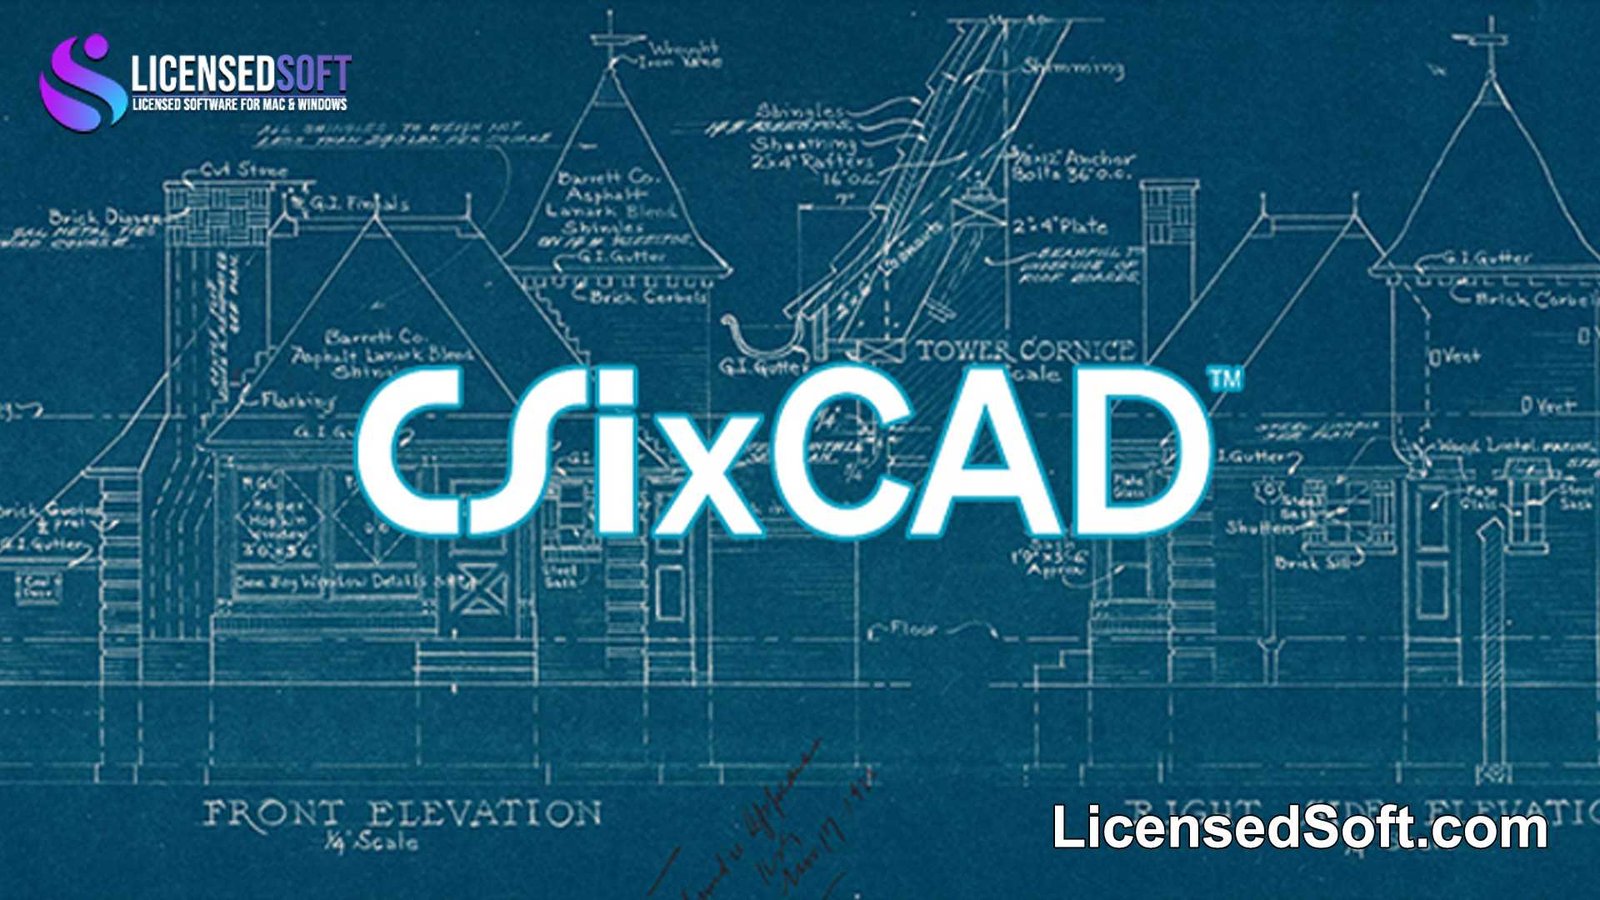 CSiXCAD 19.3.0 Perpetual License By LicensedSoft